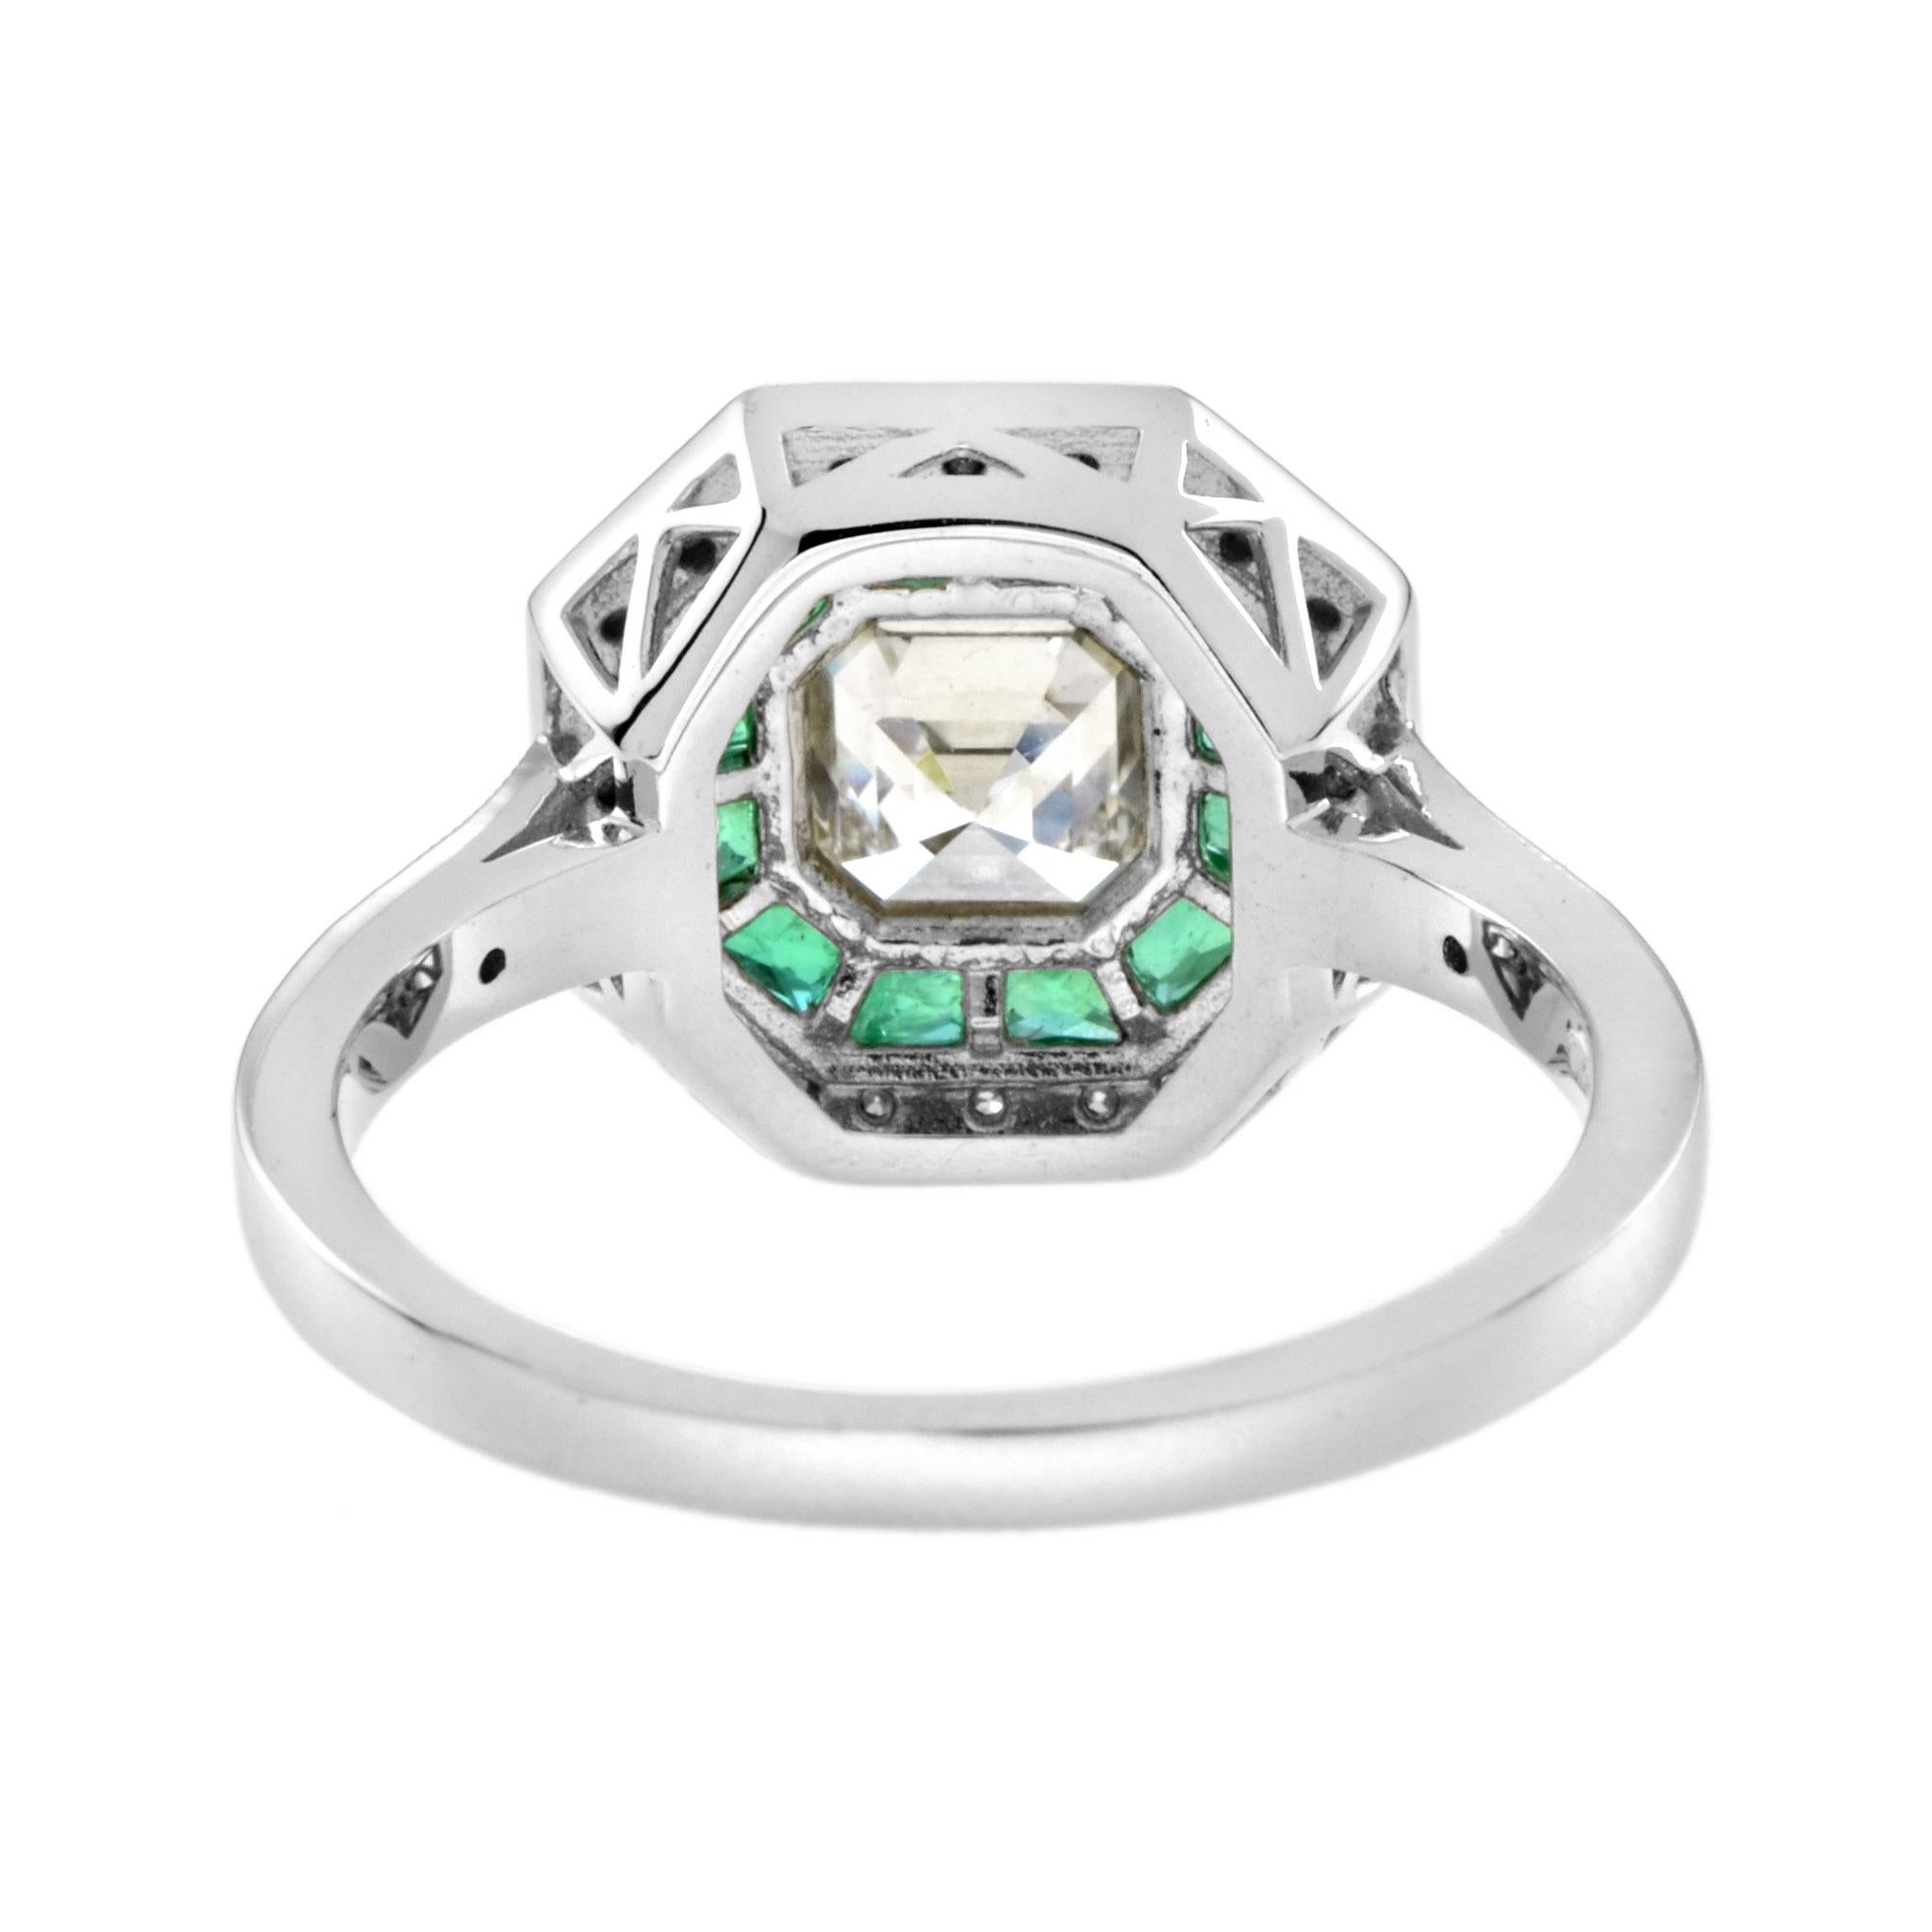 Art Deco Style Asscher Cut Diamond and Emerald Engagement Ring in 18K White Gold For Sale 2